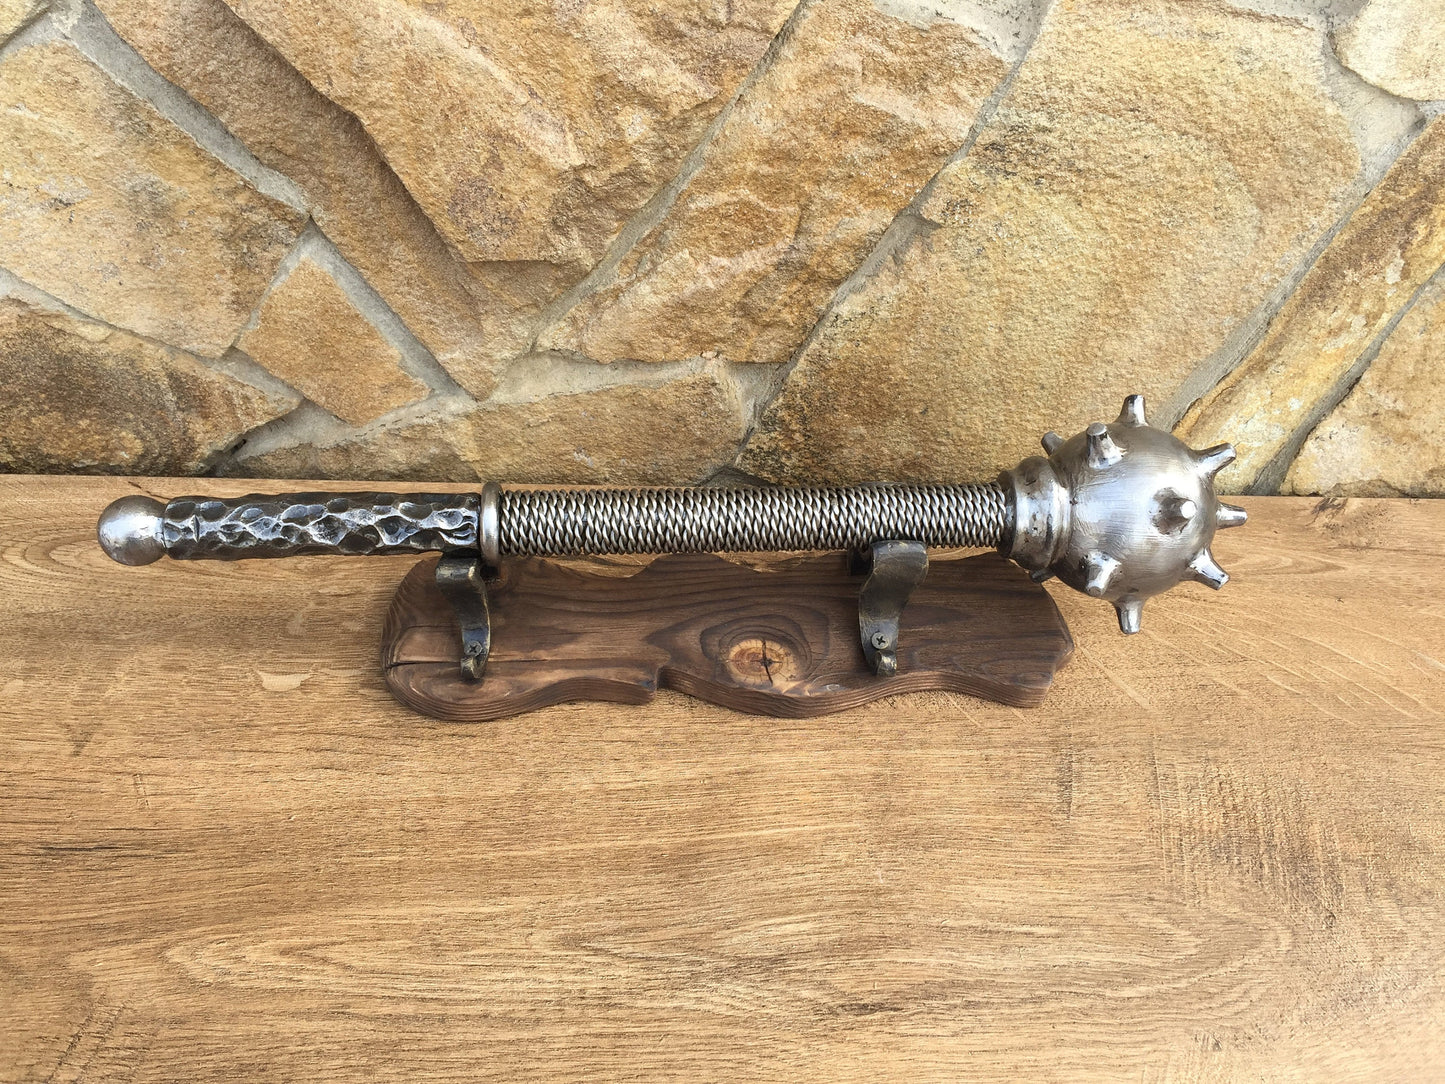 Hand forged mace, mace, war mace, flail, chain flail, medieval, knight, warrior, medieval weapon,war weapon,viking axe,mens gifts,iron gift